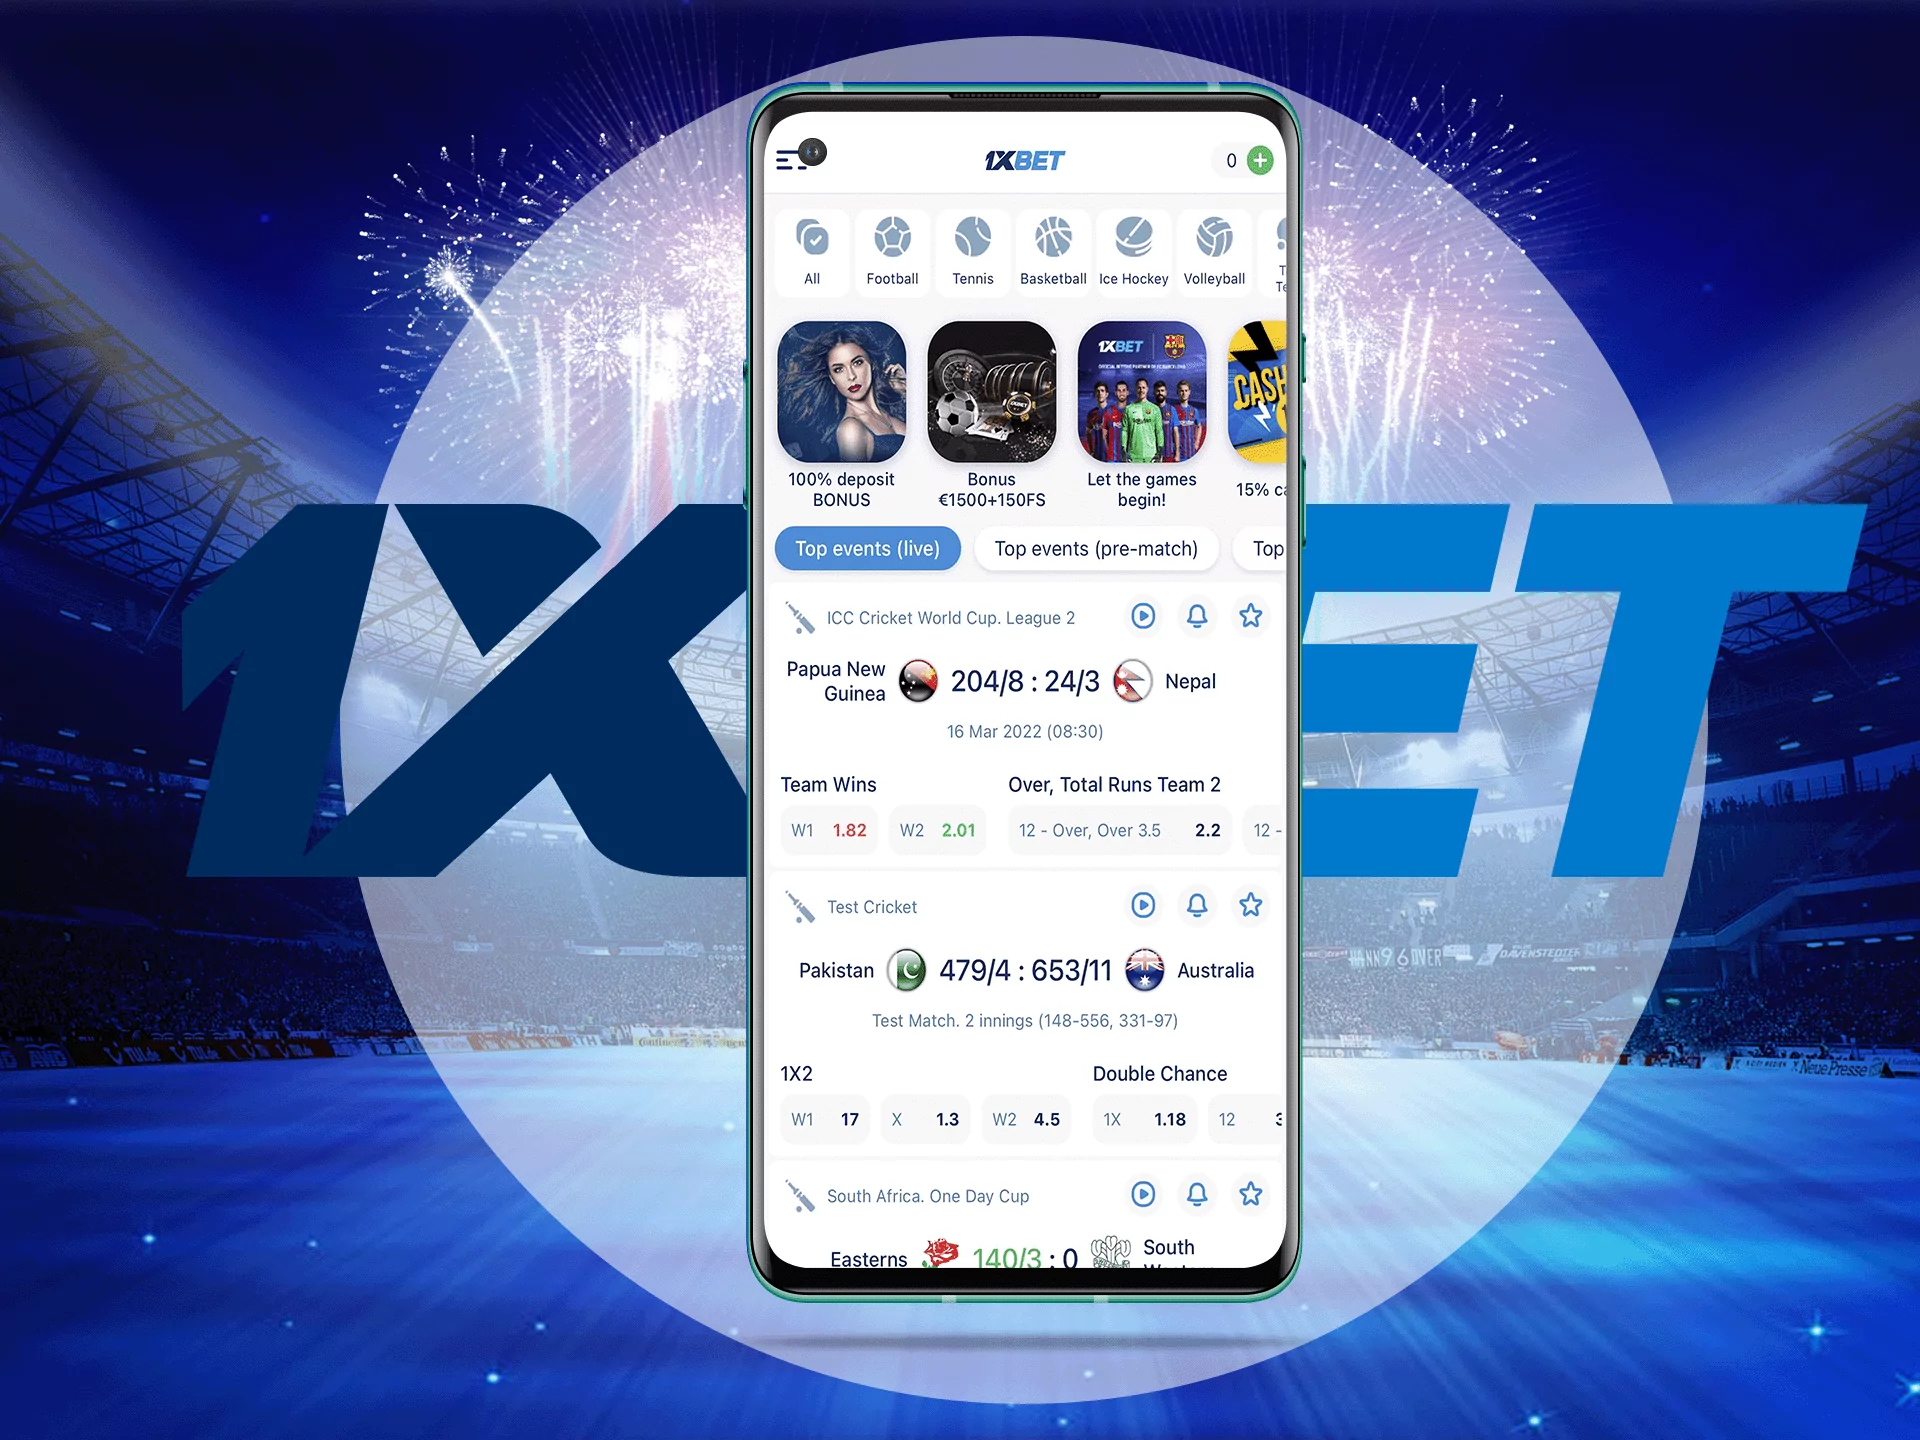 1xbet - the ability to bet in real time during the match.